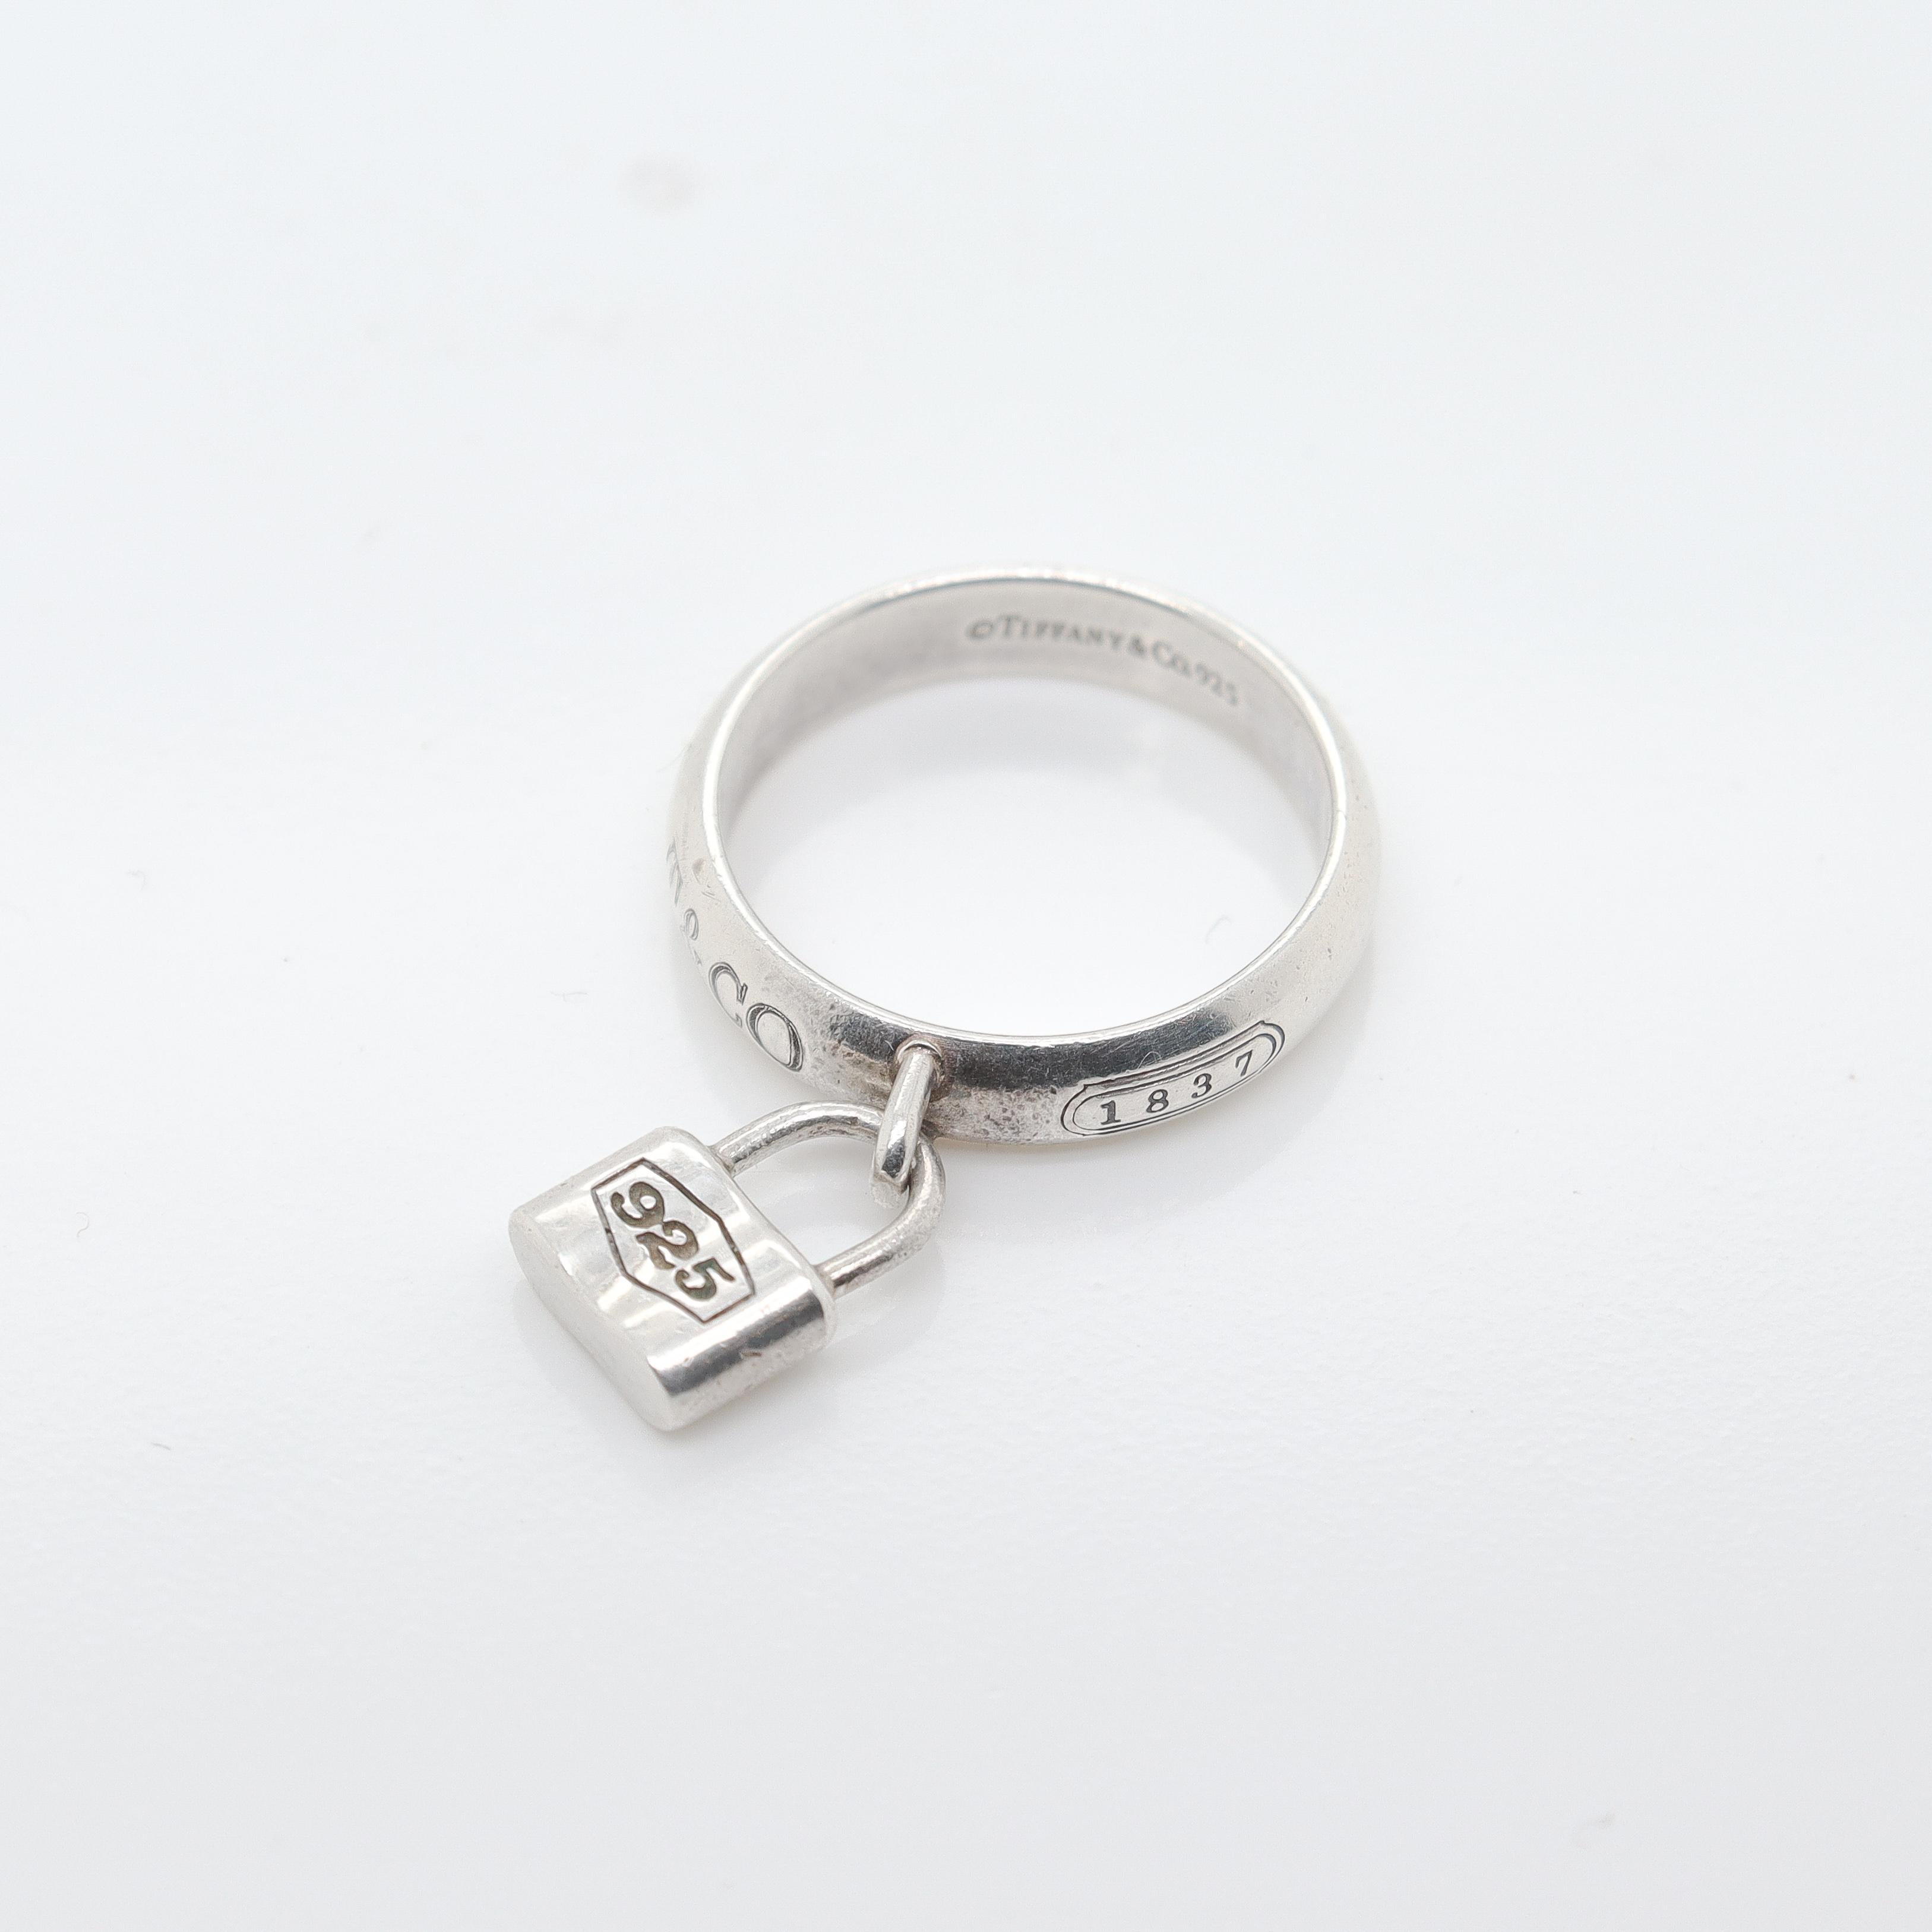 A fine Tiffany & Co. lock charm band ring.

In sterling silver.

Comprised of a round band ring set with a bail and a small attached padlock charm. 

Marked 1837 and T&Co. to the exterior of the band.

Simply wonderful design from Tiffany &